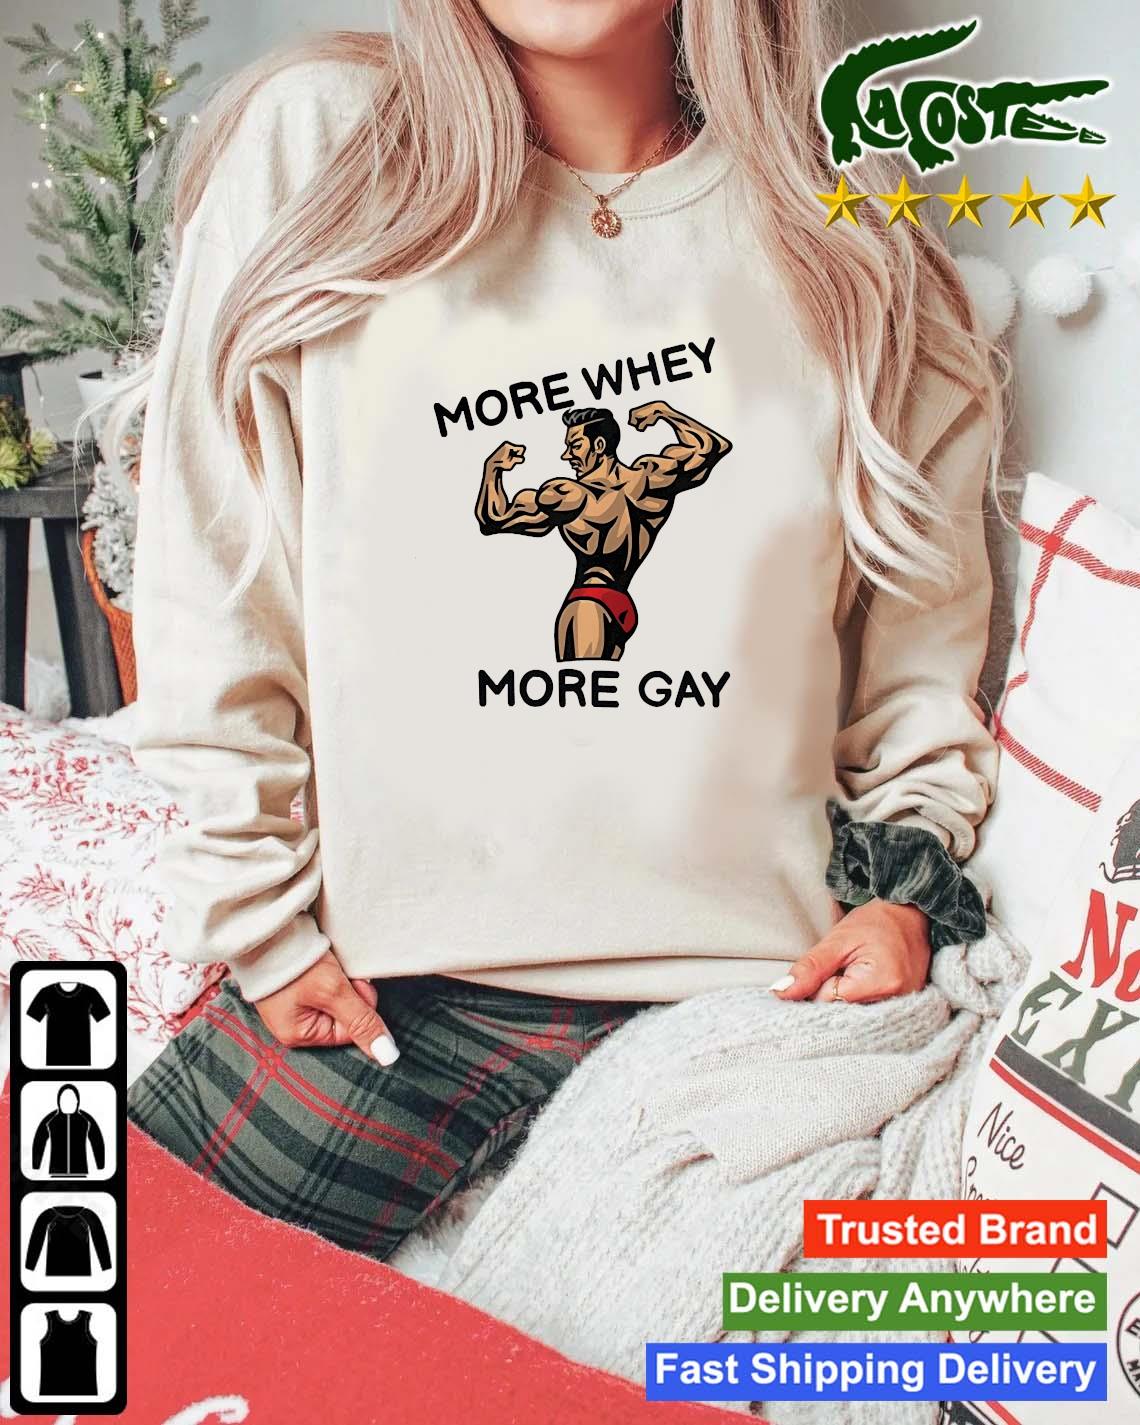 More Whey More Gay Sweats Mockup Sweater